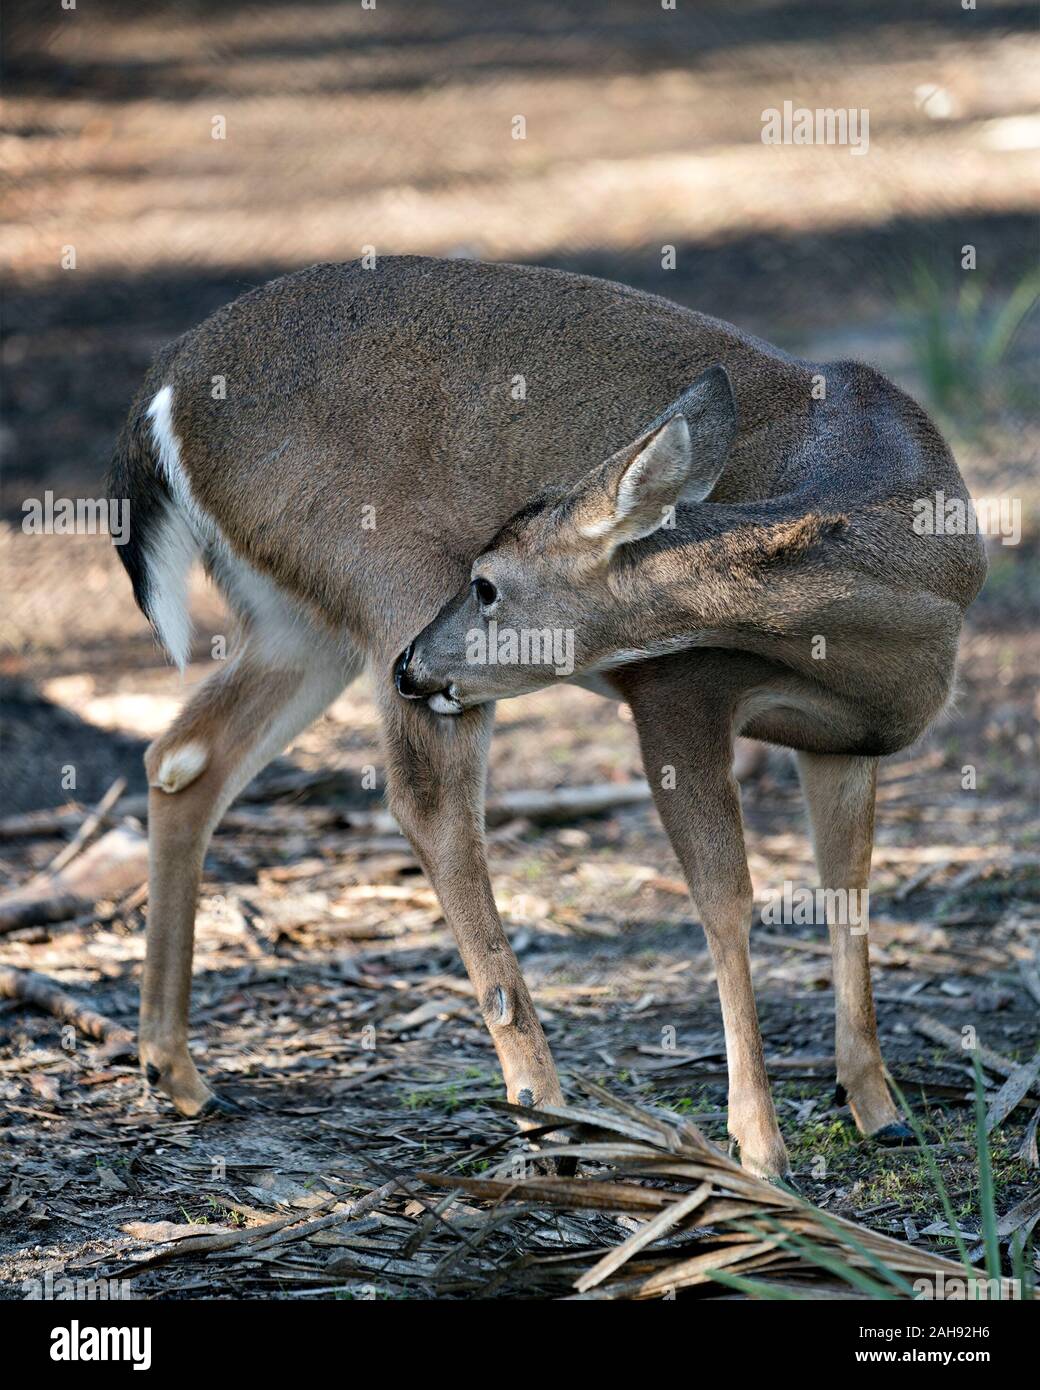 Deer close-up profile view walking in the field displaying brown fur, body, head, ears, eyes, nose, legs, with a bokeh background in its environment a Stock Photo